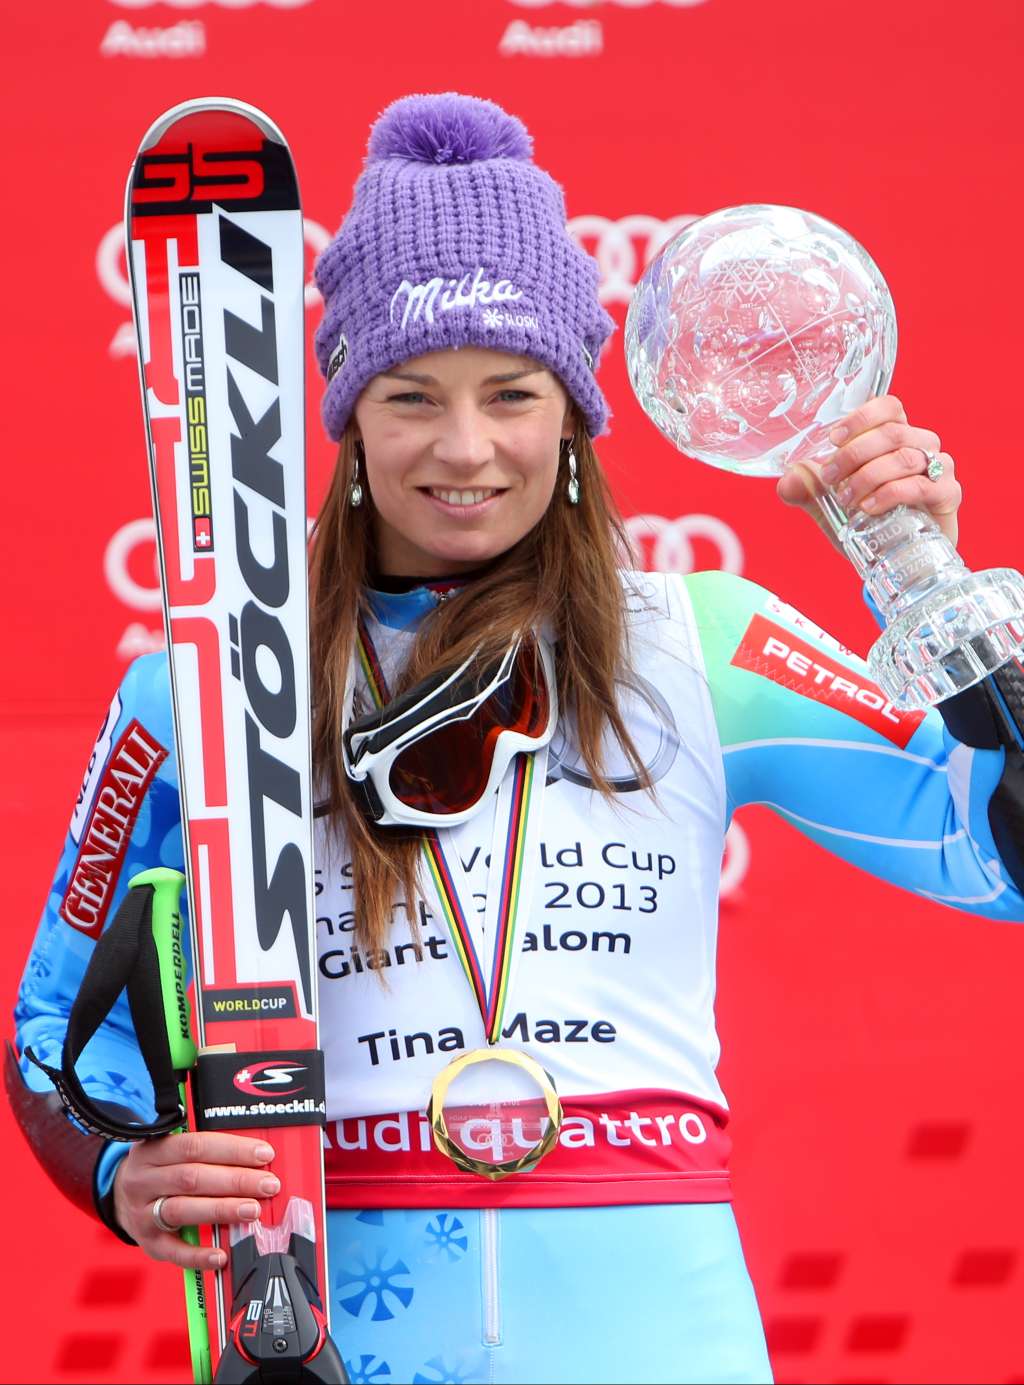 Tina Maze with her Crystal Globe trophy